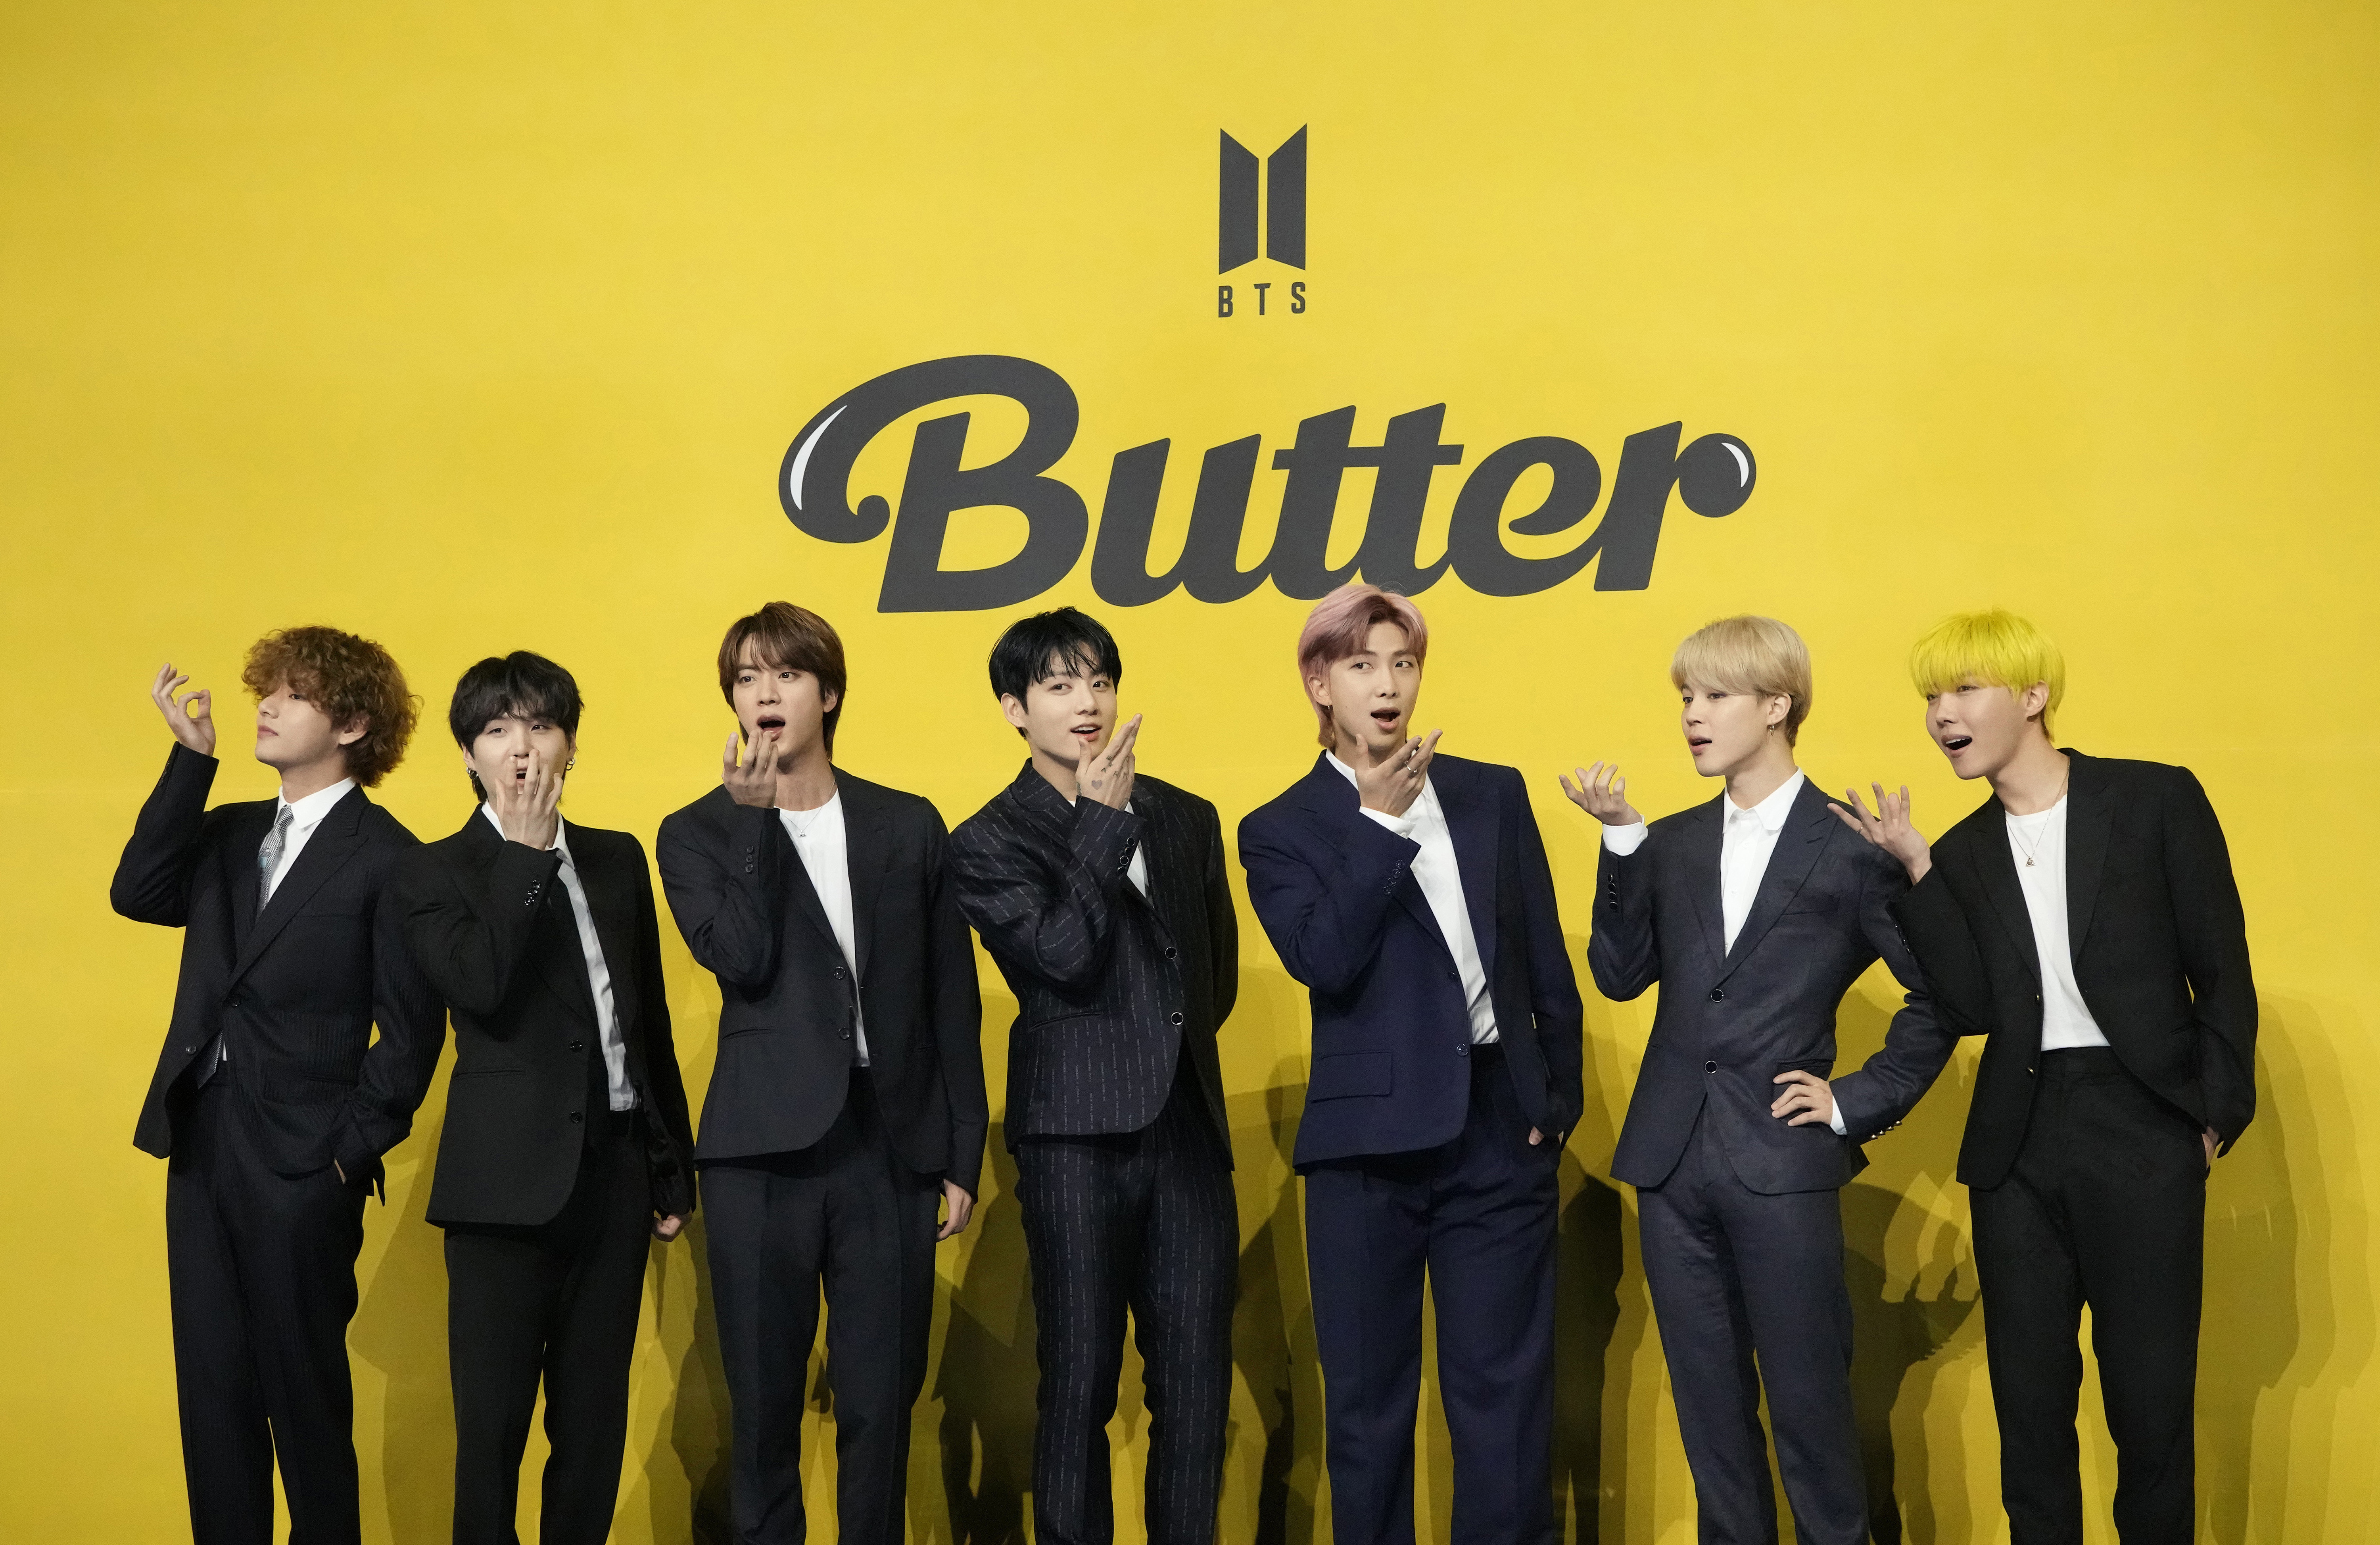 FILE - Members of South Korean K-pop band BTS, V, SUGA, JIN, Jung Kook, RM, Jimin, and j-hope from left to right, pose for photographers ahead of a news conference to introduce their new single "Butter" in Seoul, South Korea, May 21, 2021. The speculation over an untitled book can end, and it is BTS fans, not followers of Taylor Swift, who can rejoice. Flatiron Books announced Thursday, May 11, 2023, the book “4C Untitled Flatiron Nonfiction Summer 2023” was in fact about the mega-popular South Korean boy band, not Swift. (AP Photo/Lee Jin-man, File)